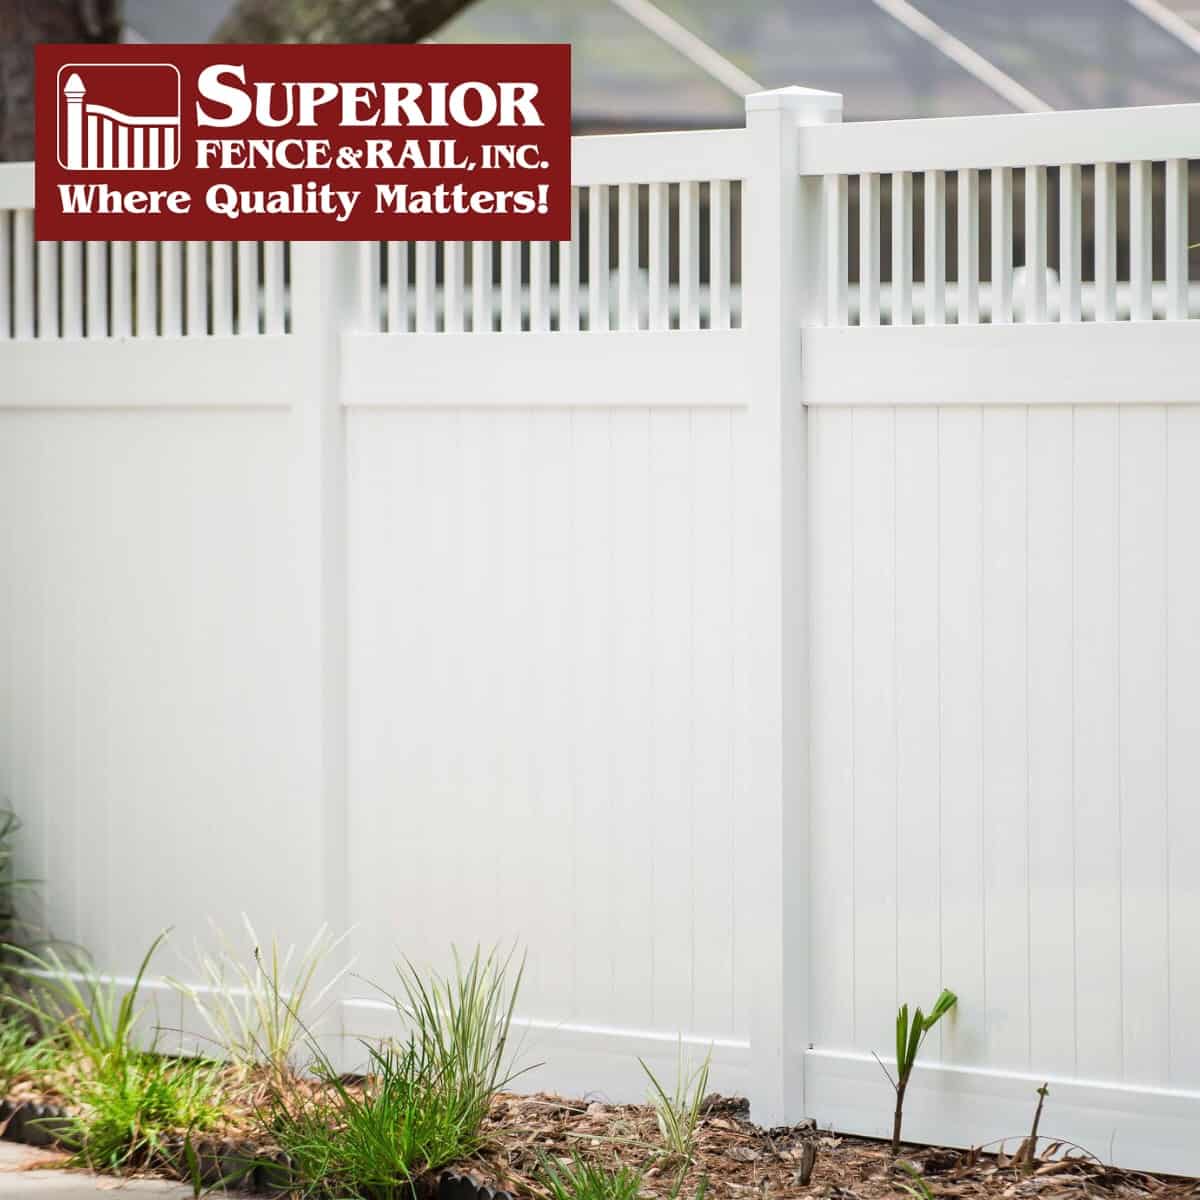 Winder fence company contractor